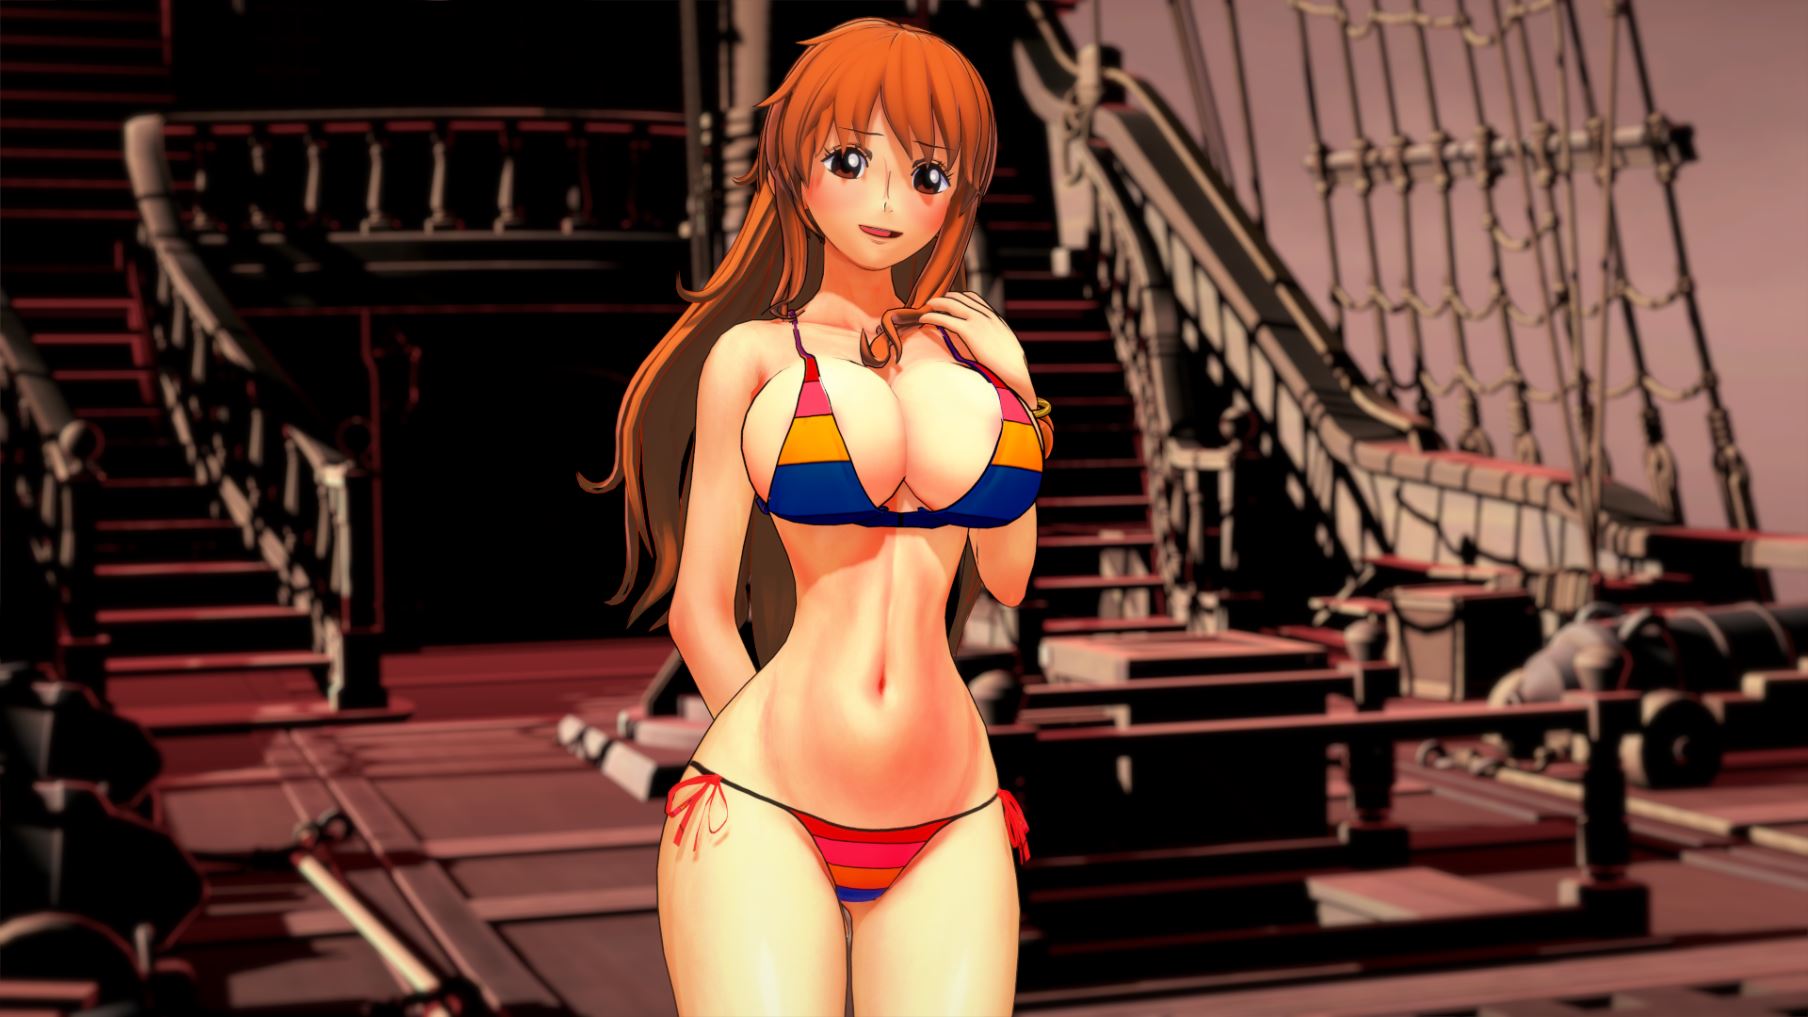 Sea Www Xxx - Ren'Py] One Piece: Lost at Sea - v0.1a by Dochino 18+ Adult xxx Porn Game  Download